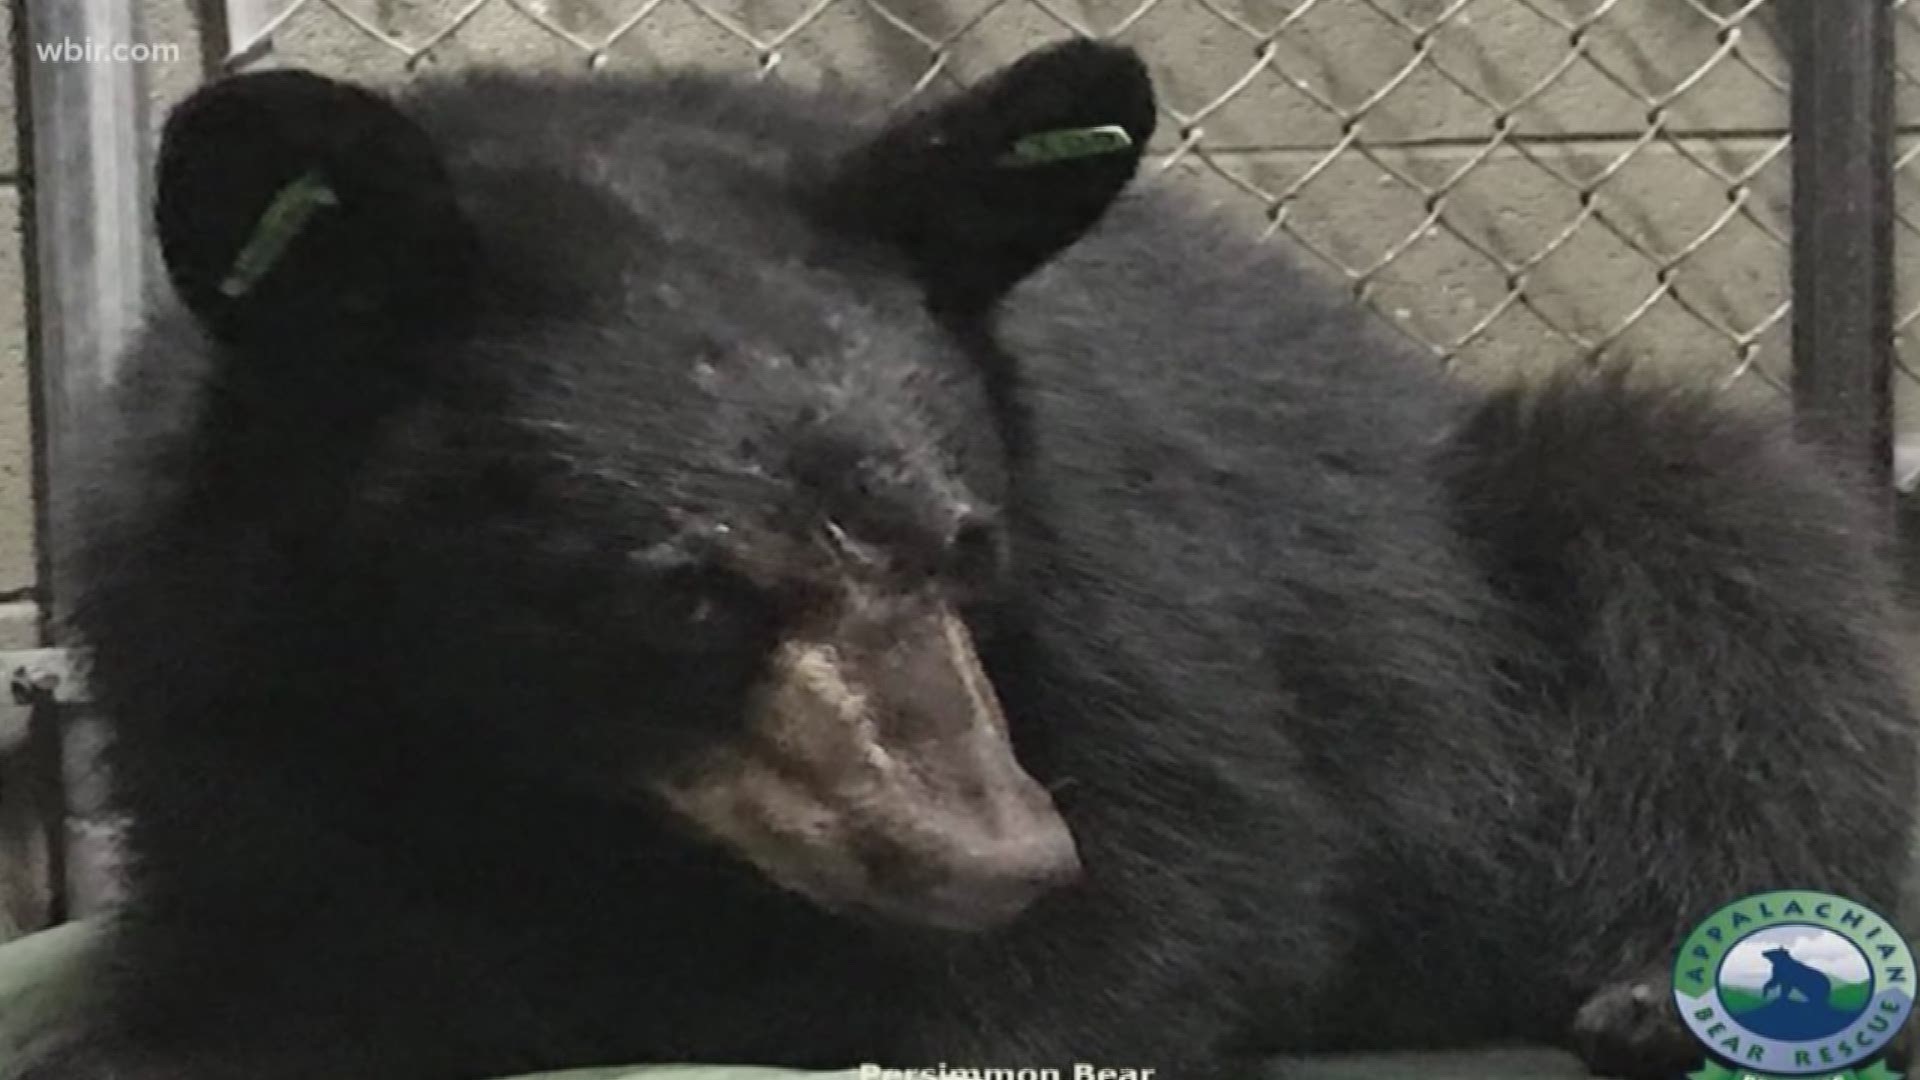 The bear, named Persimmon, had suffered rib and lung injuries and is recovering.